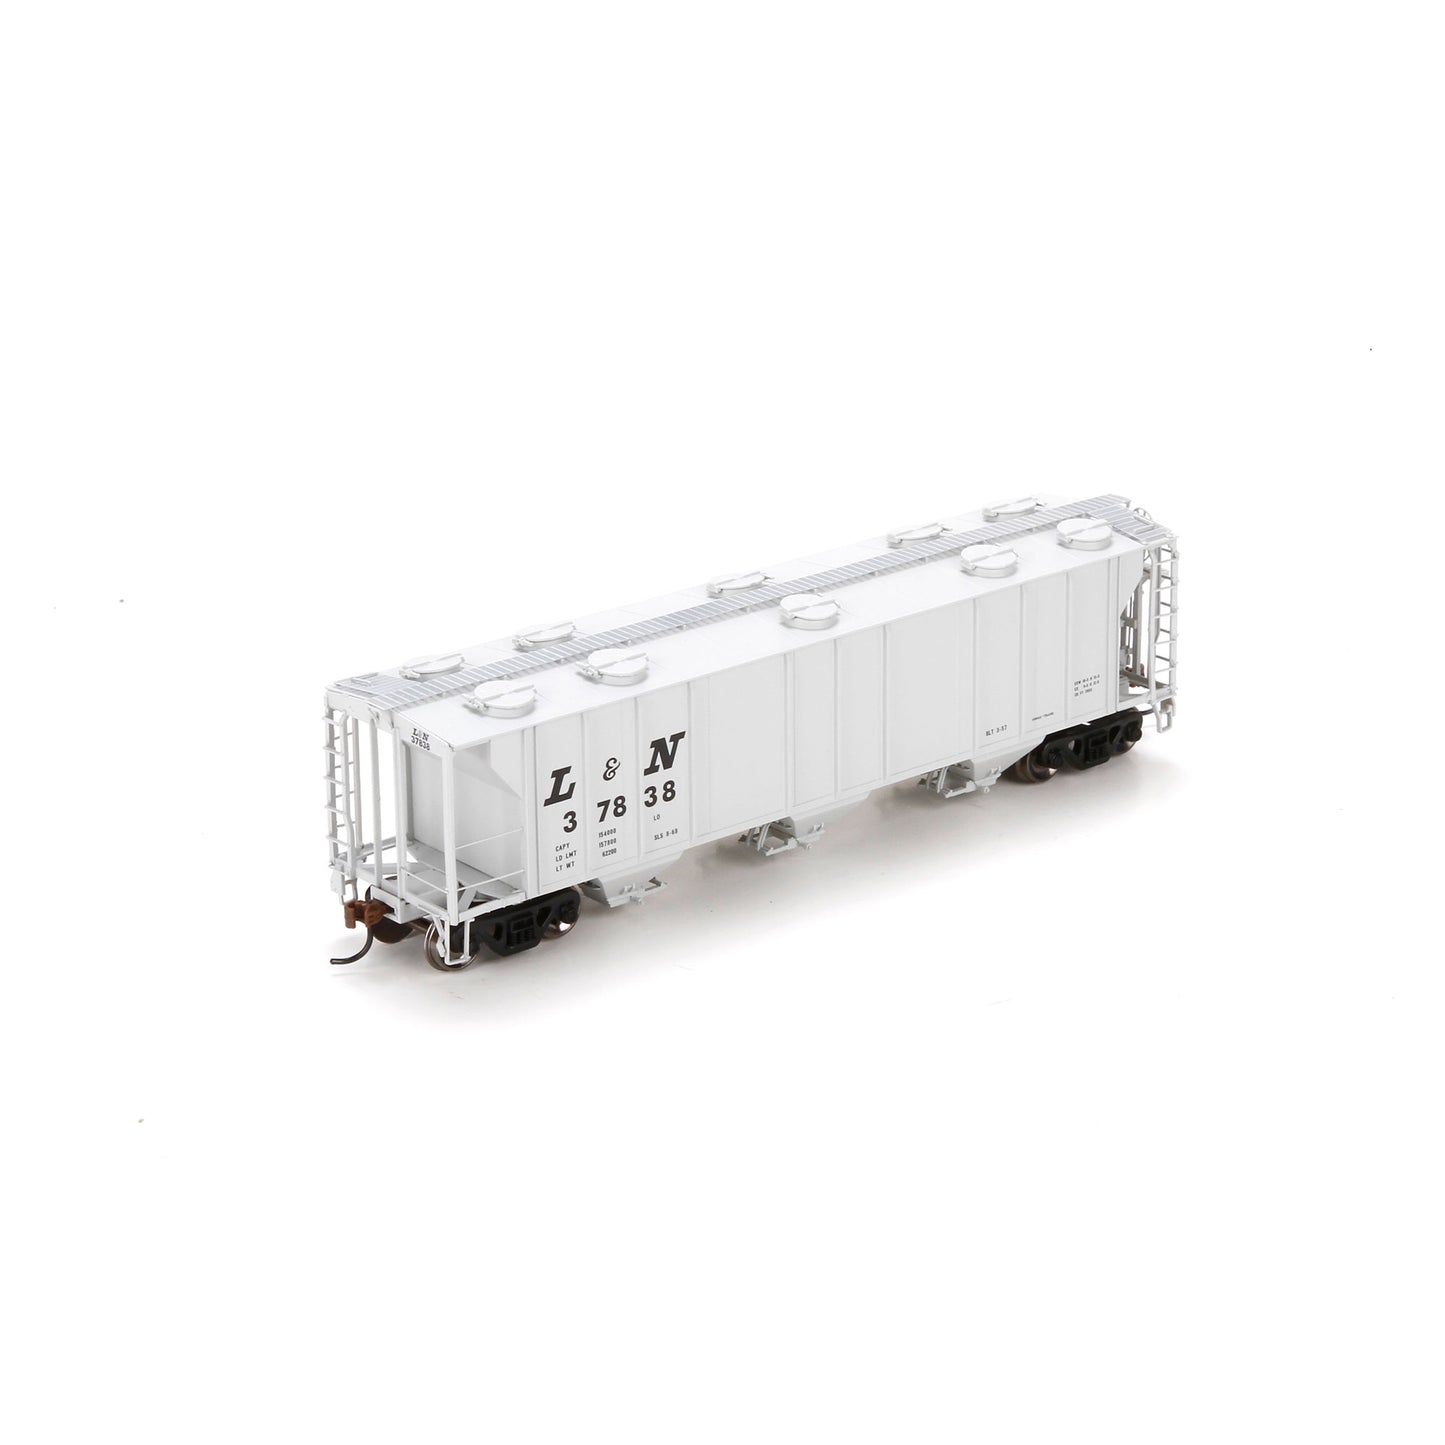 Athearn 89096 HO Louisville and Nashville PS-2 2893 3-Bay Covered Hopper #37838